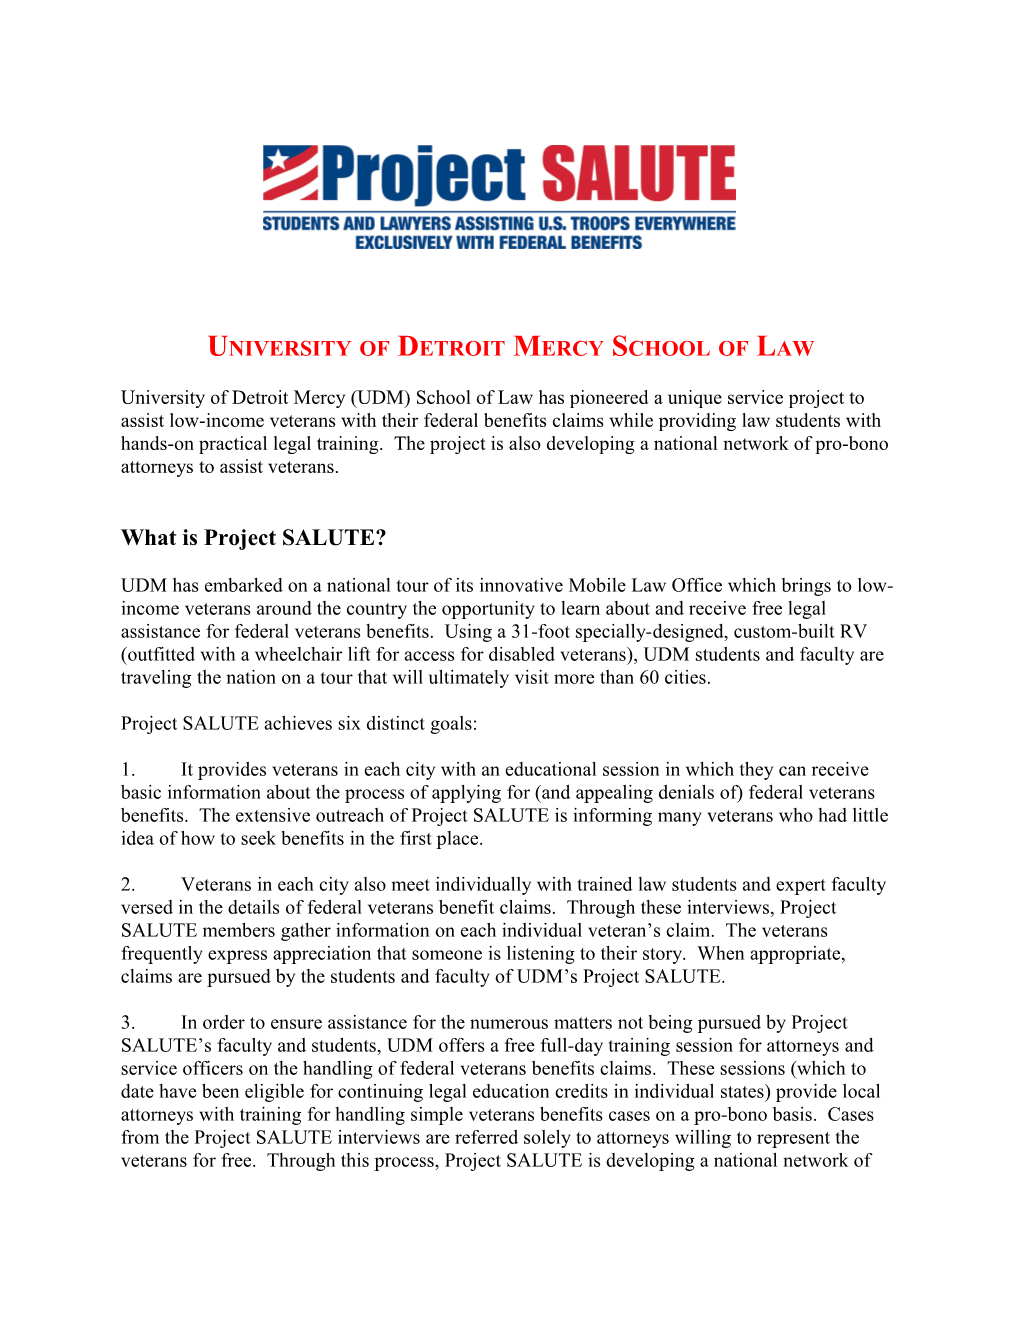 University of Detroit Mercy School of Law S Project SALUTE (Students and Lawyers Assisting U